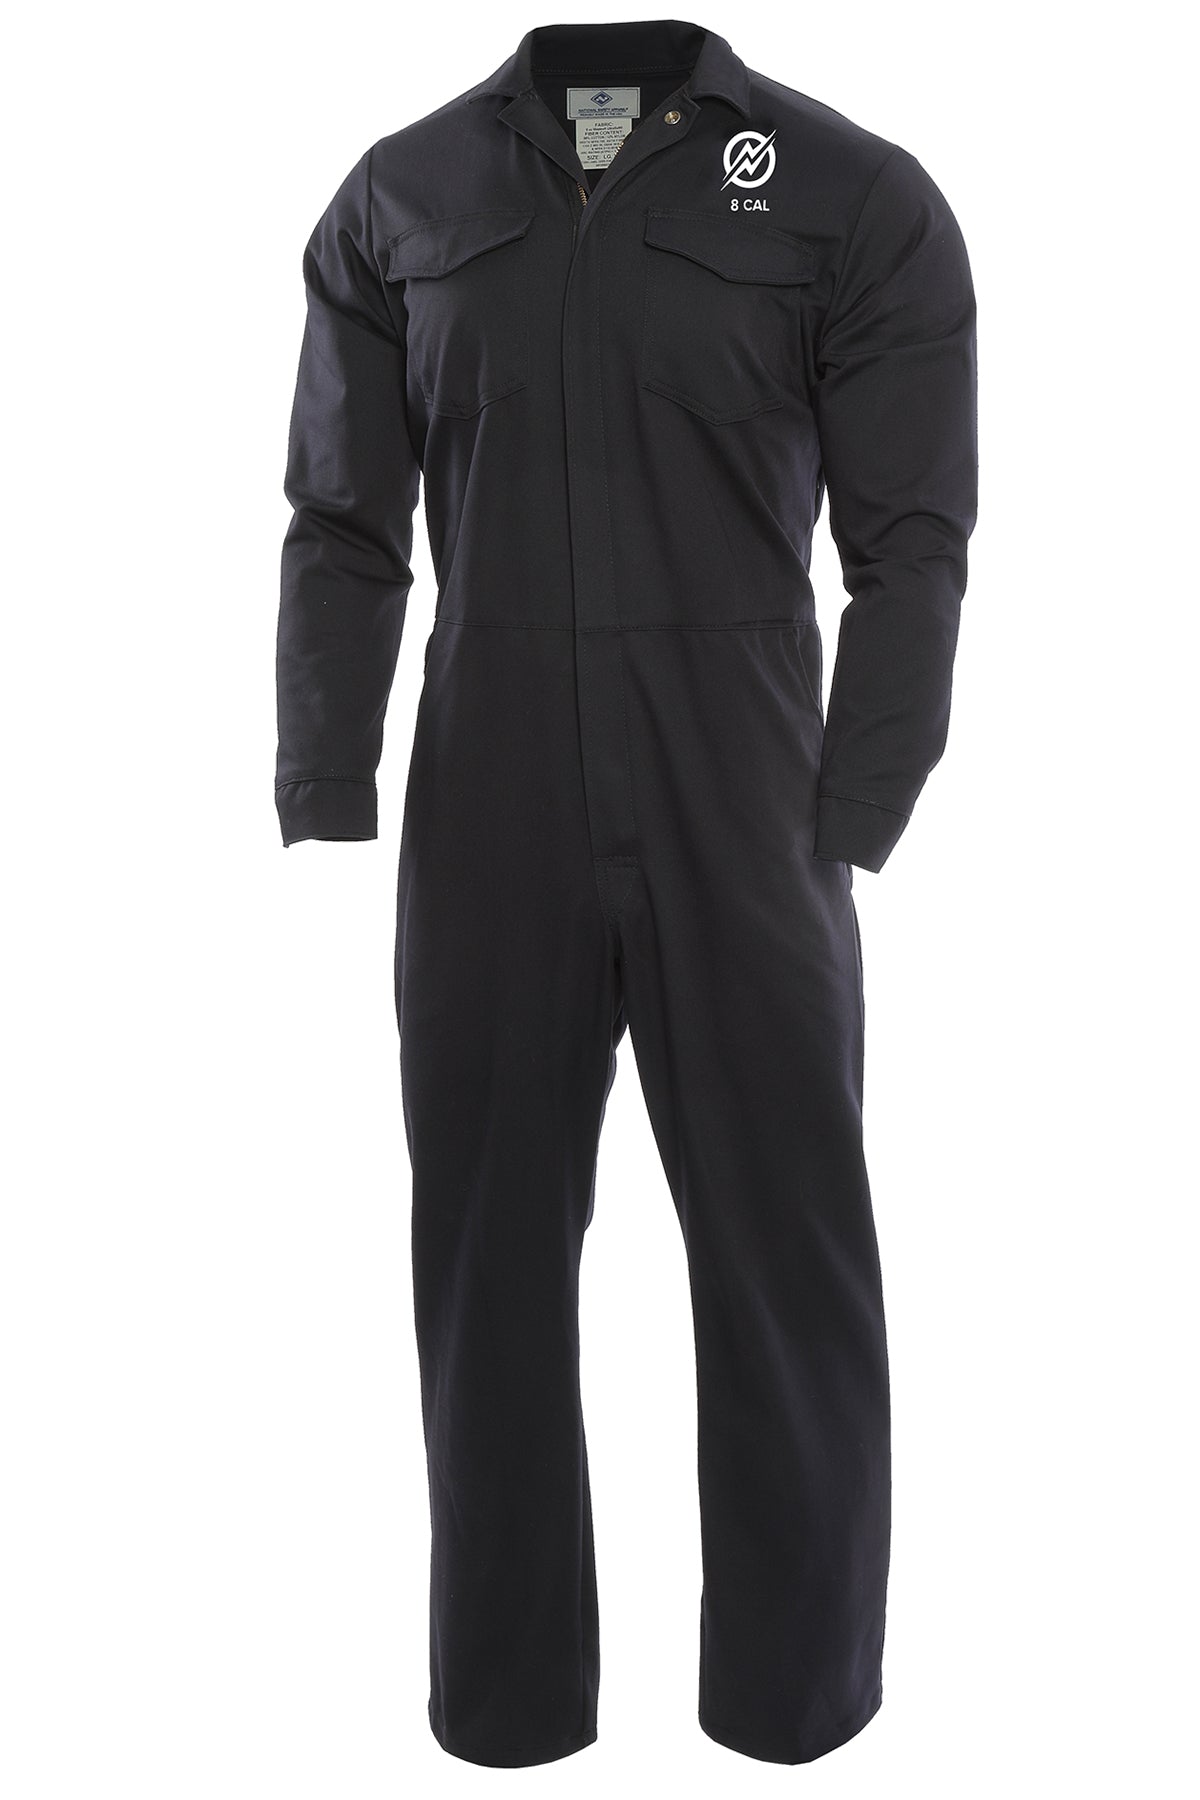 Enespro 8 Cal Coverall